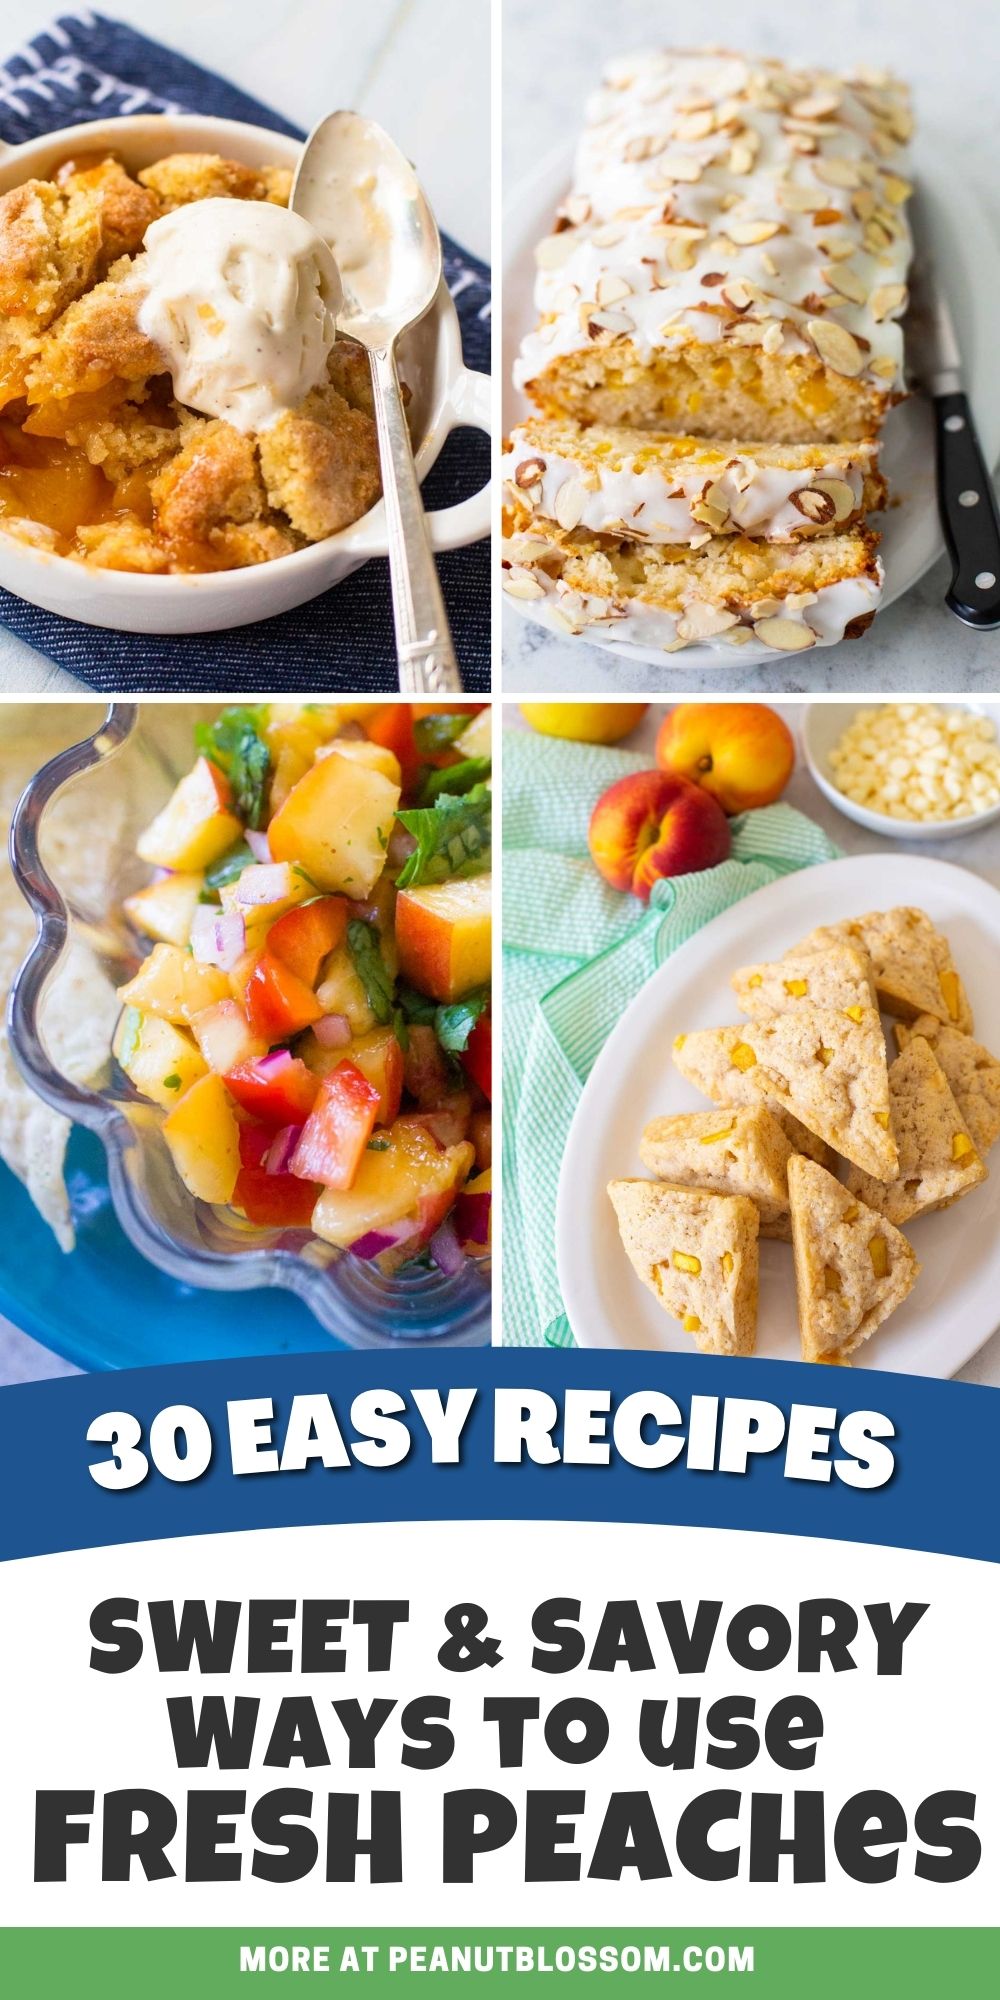 A photo collage shows several of the best fresh peach recipes.